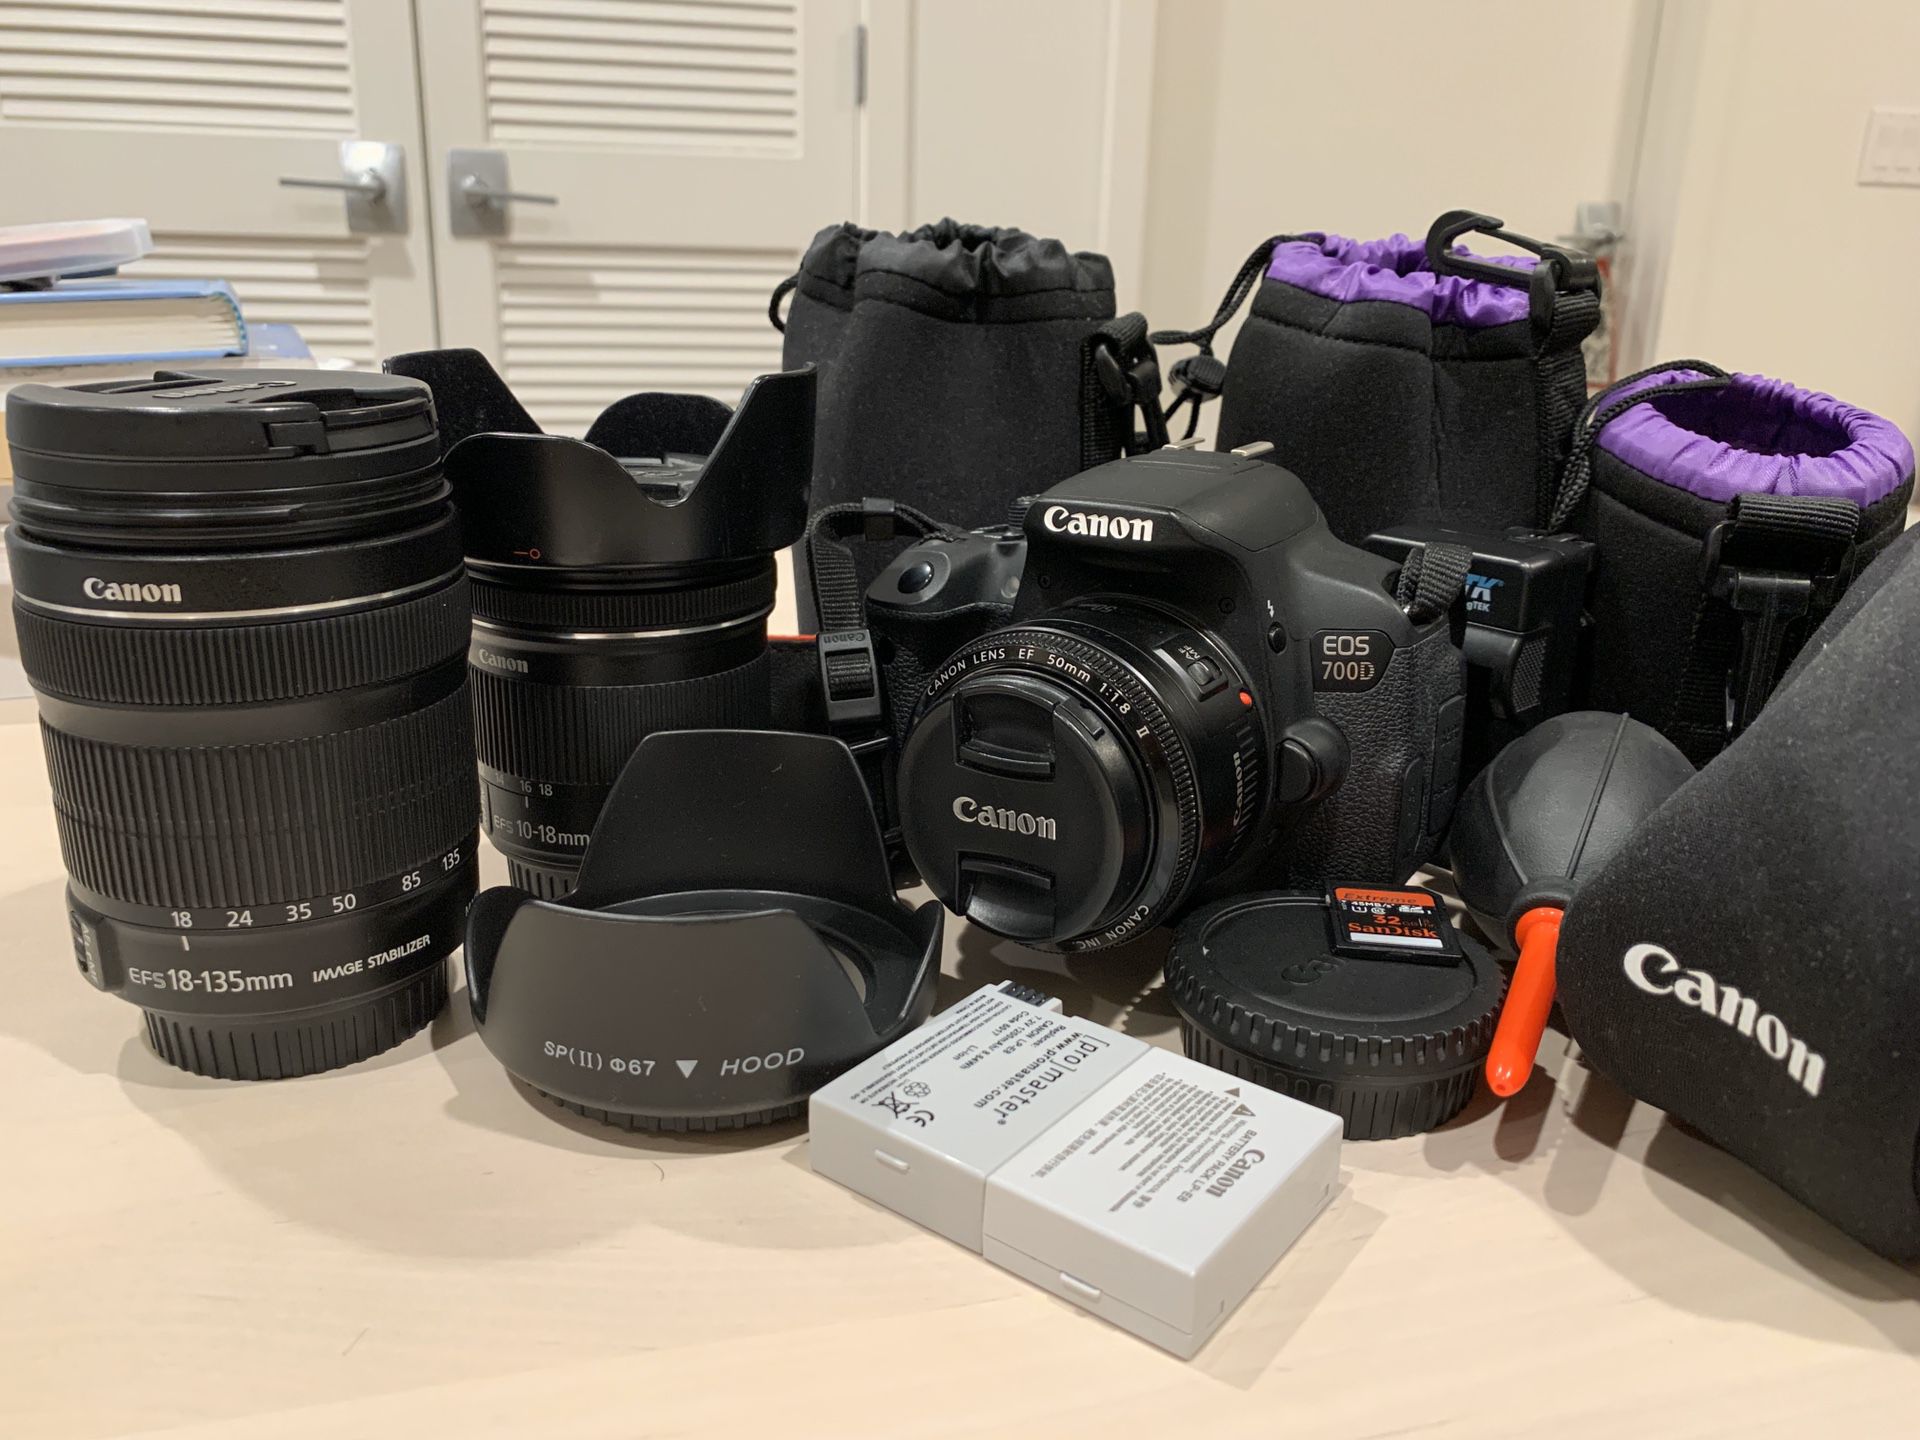 Canon EOS Rebel T5i/700D w/ 18-135mm, 10-18mm and 50mm lenses